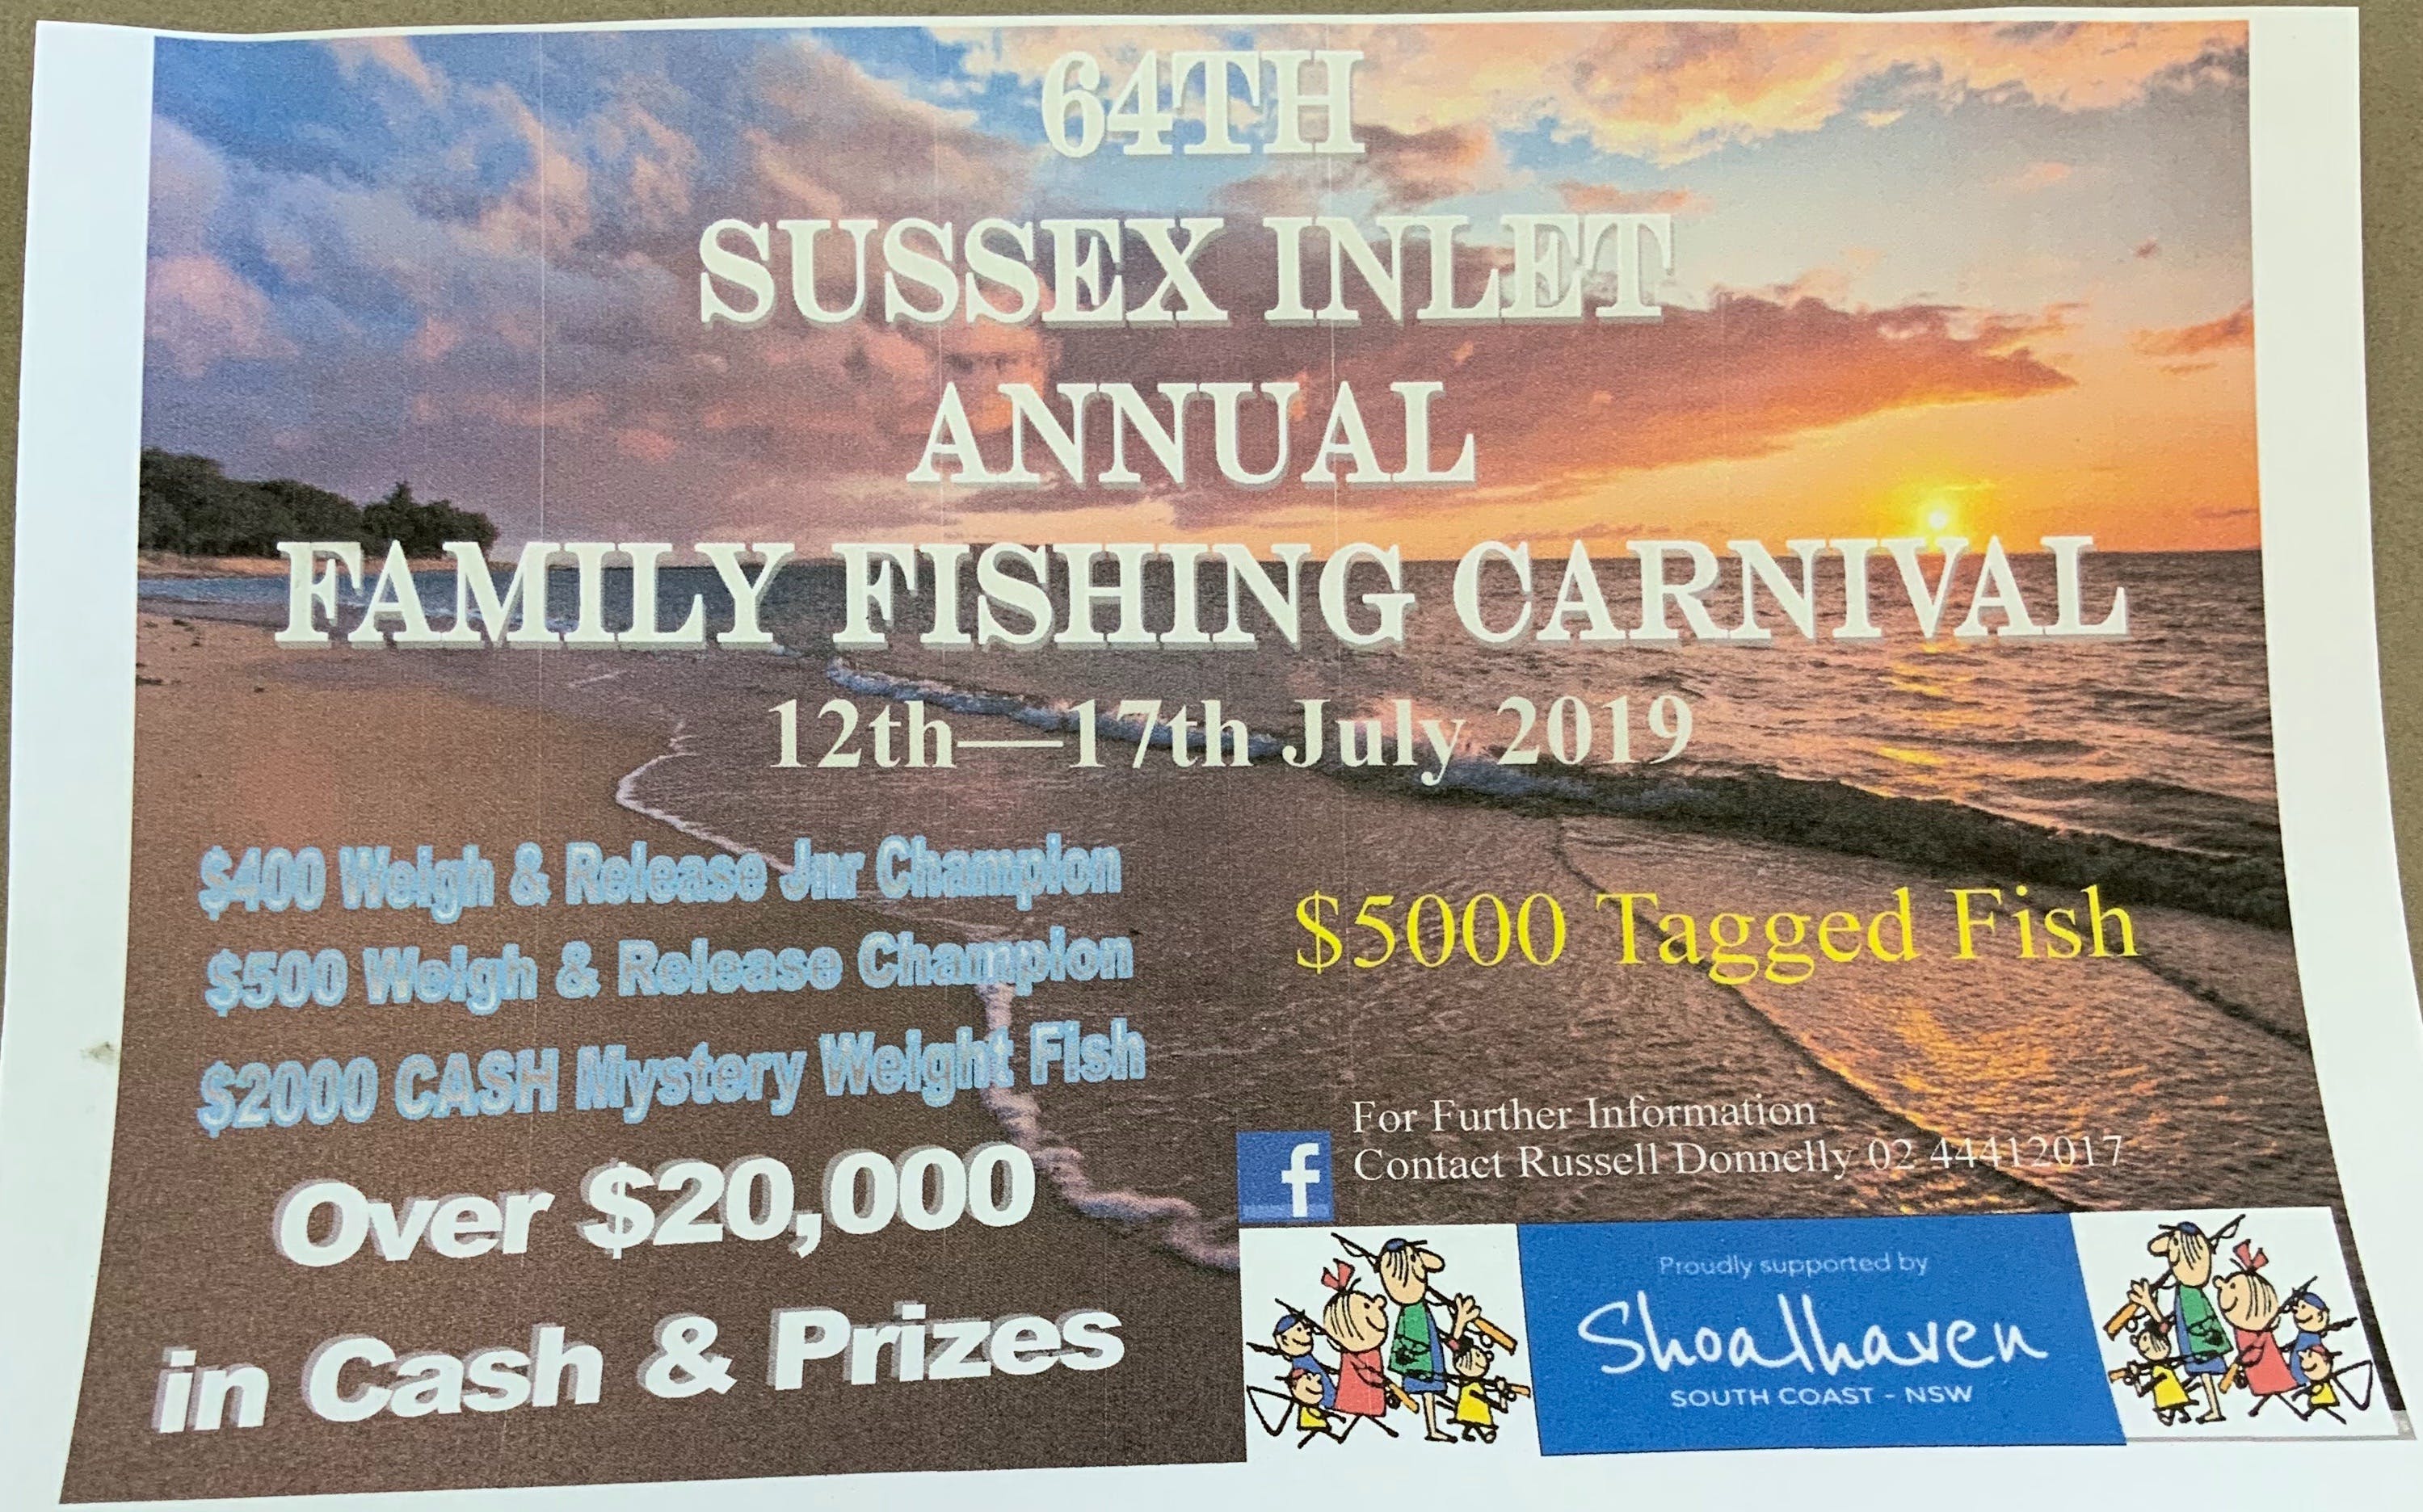 The Sussex Inlet Annual Family Fishing Carnival - Perisher Accommodation